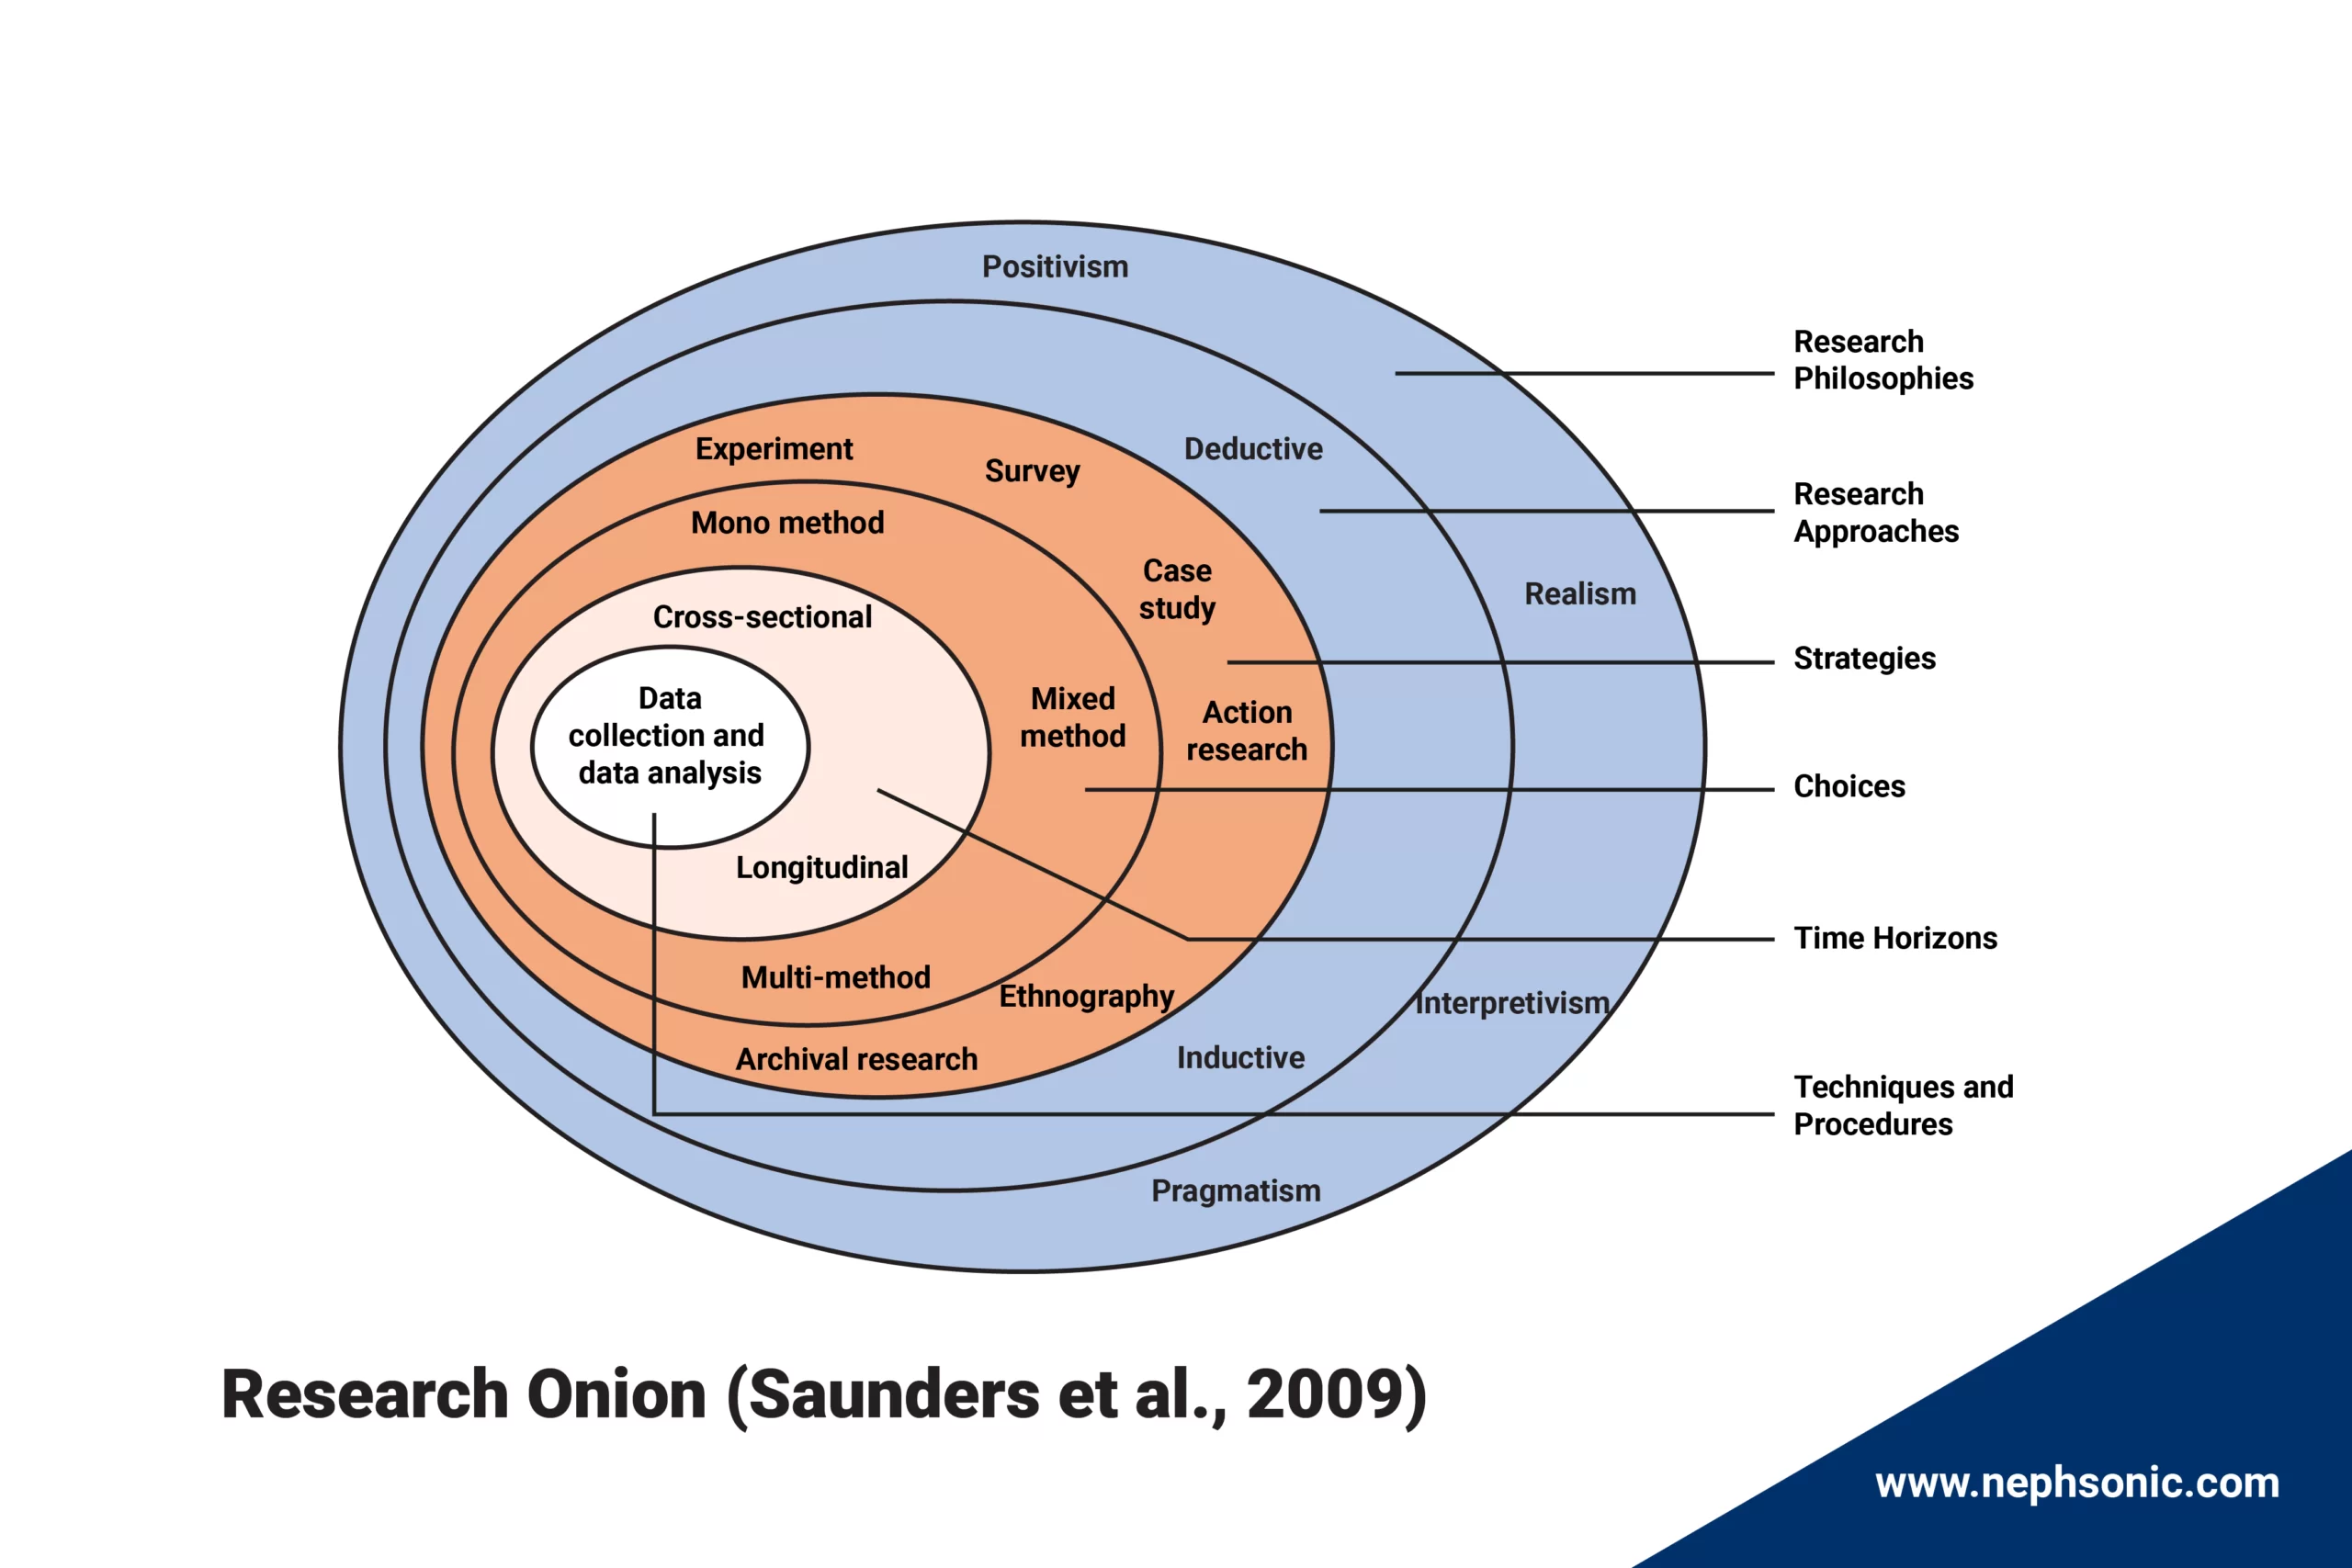 the research onion by saunders